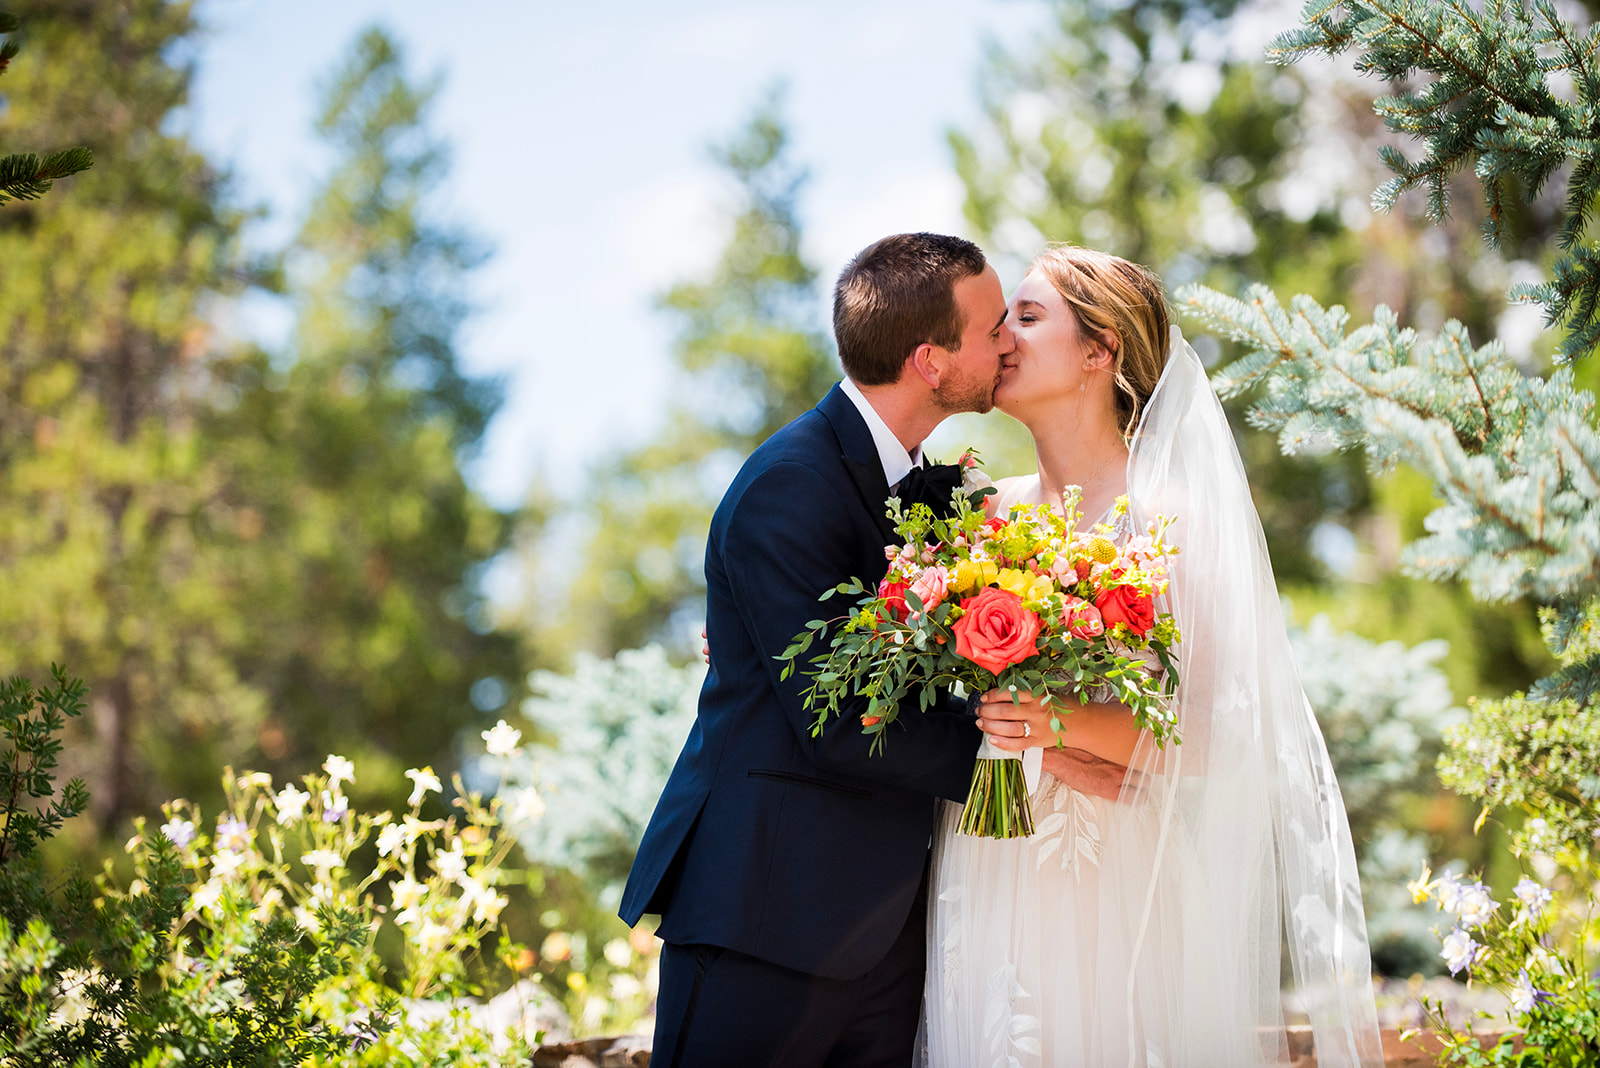 The bride and groom share a kiss as she holds her colorful summer bouquet.